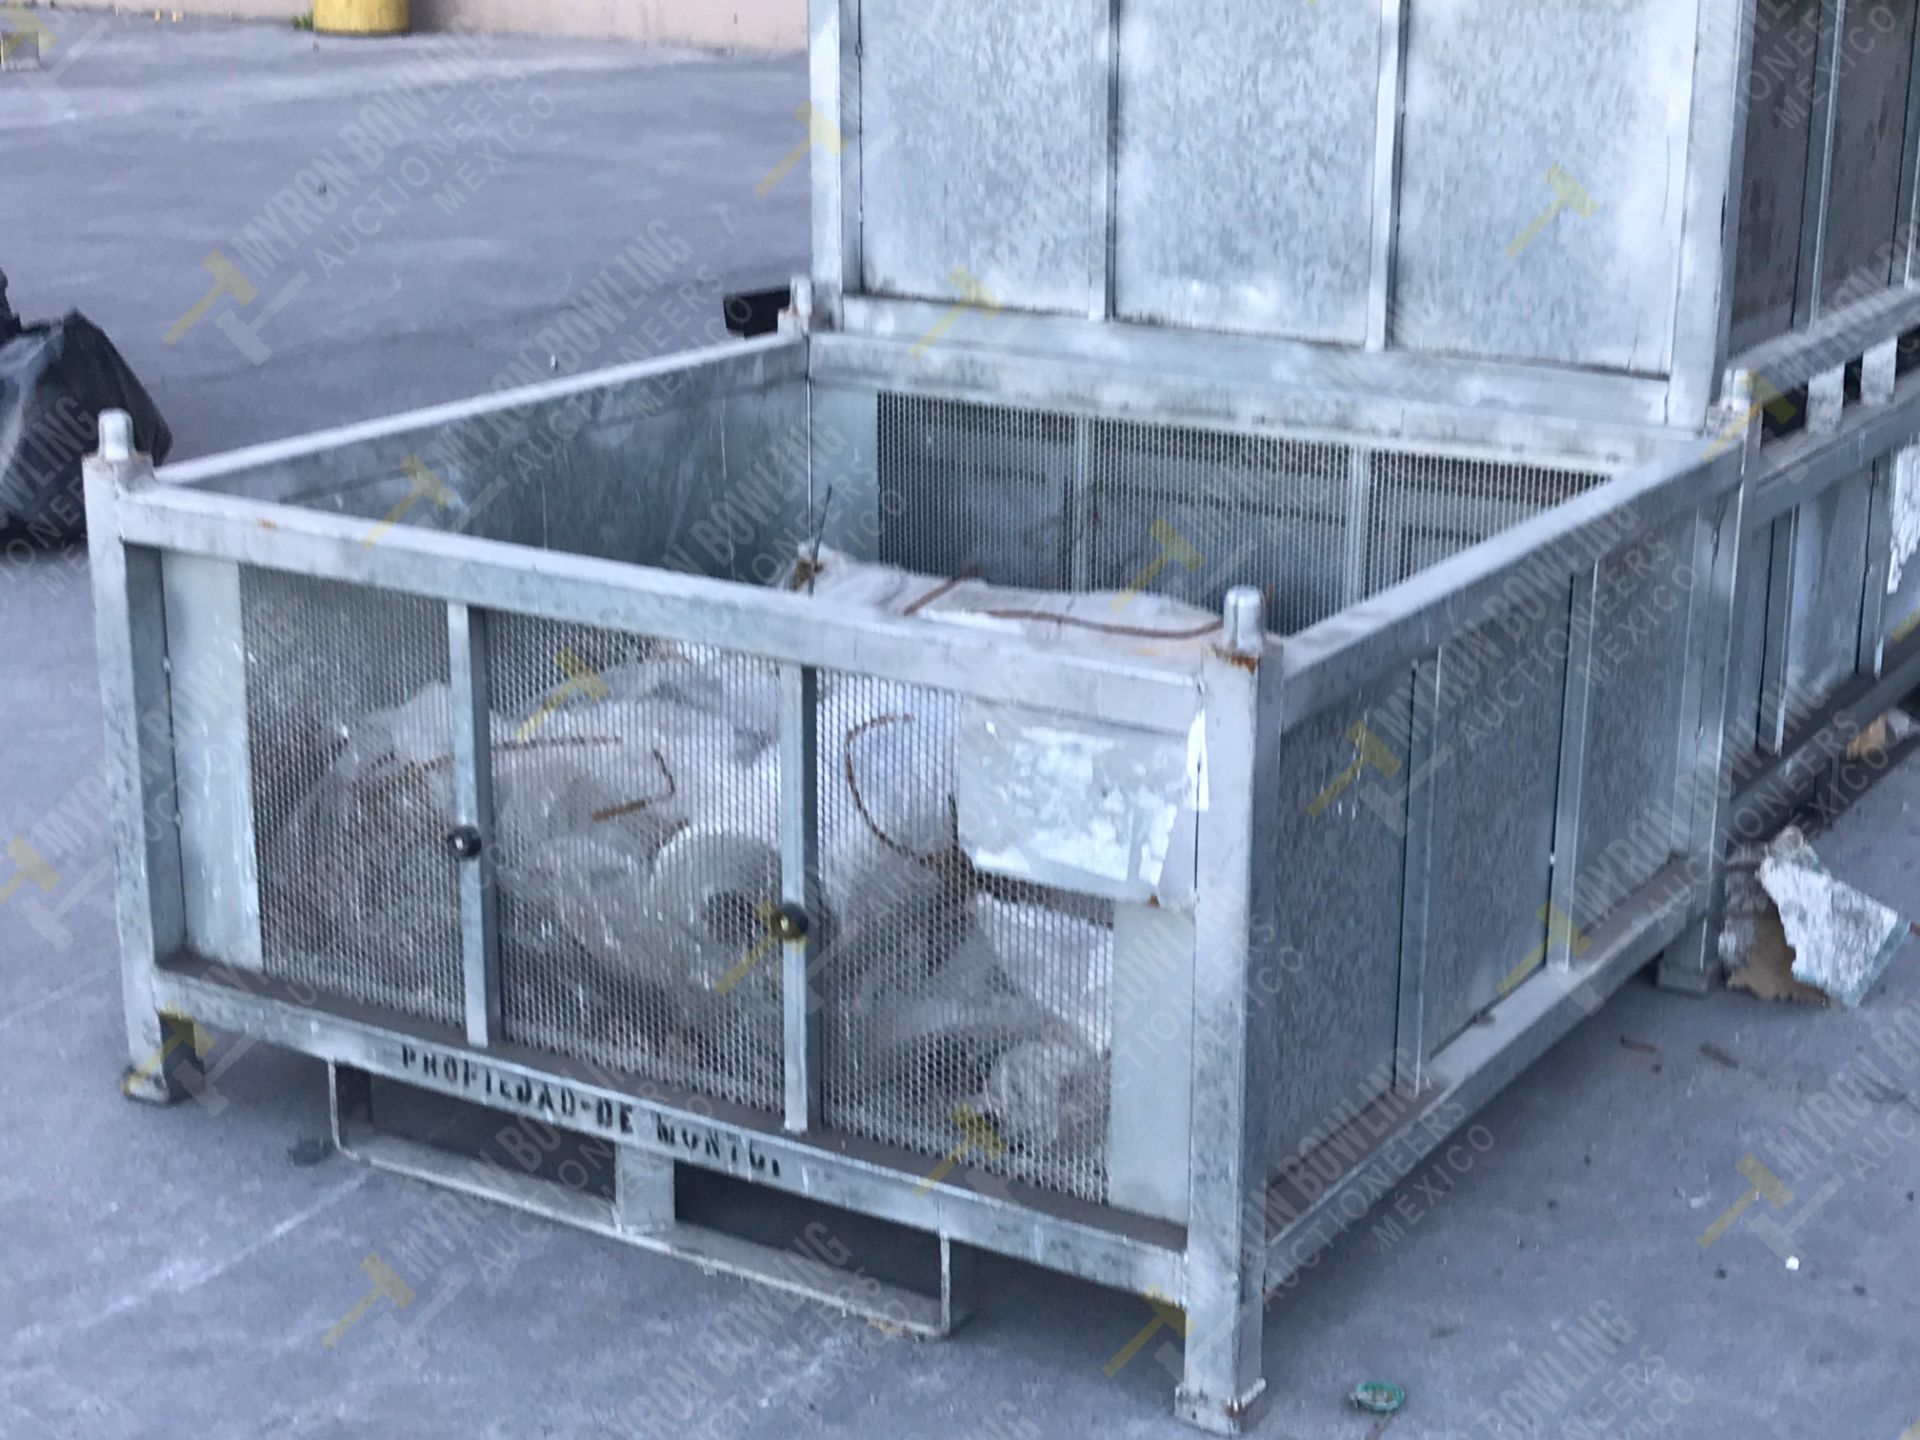 70 GALVANIZED STEEL CONTAINERS XYTEC (DIMENSIONS 0.60x1.32x1.24 METERS) - Image 6 of 10